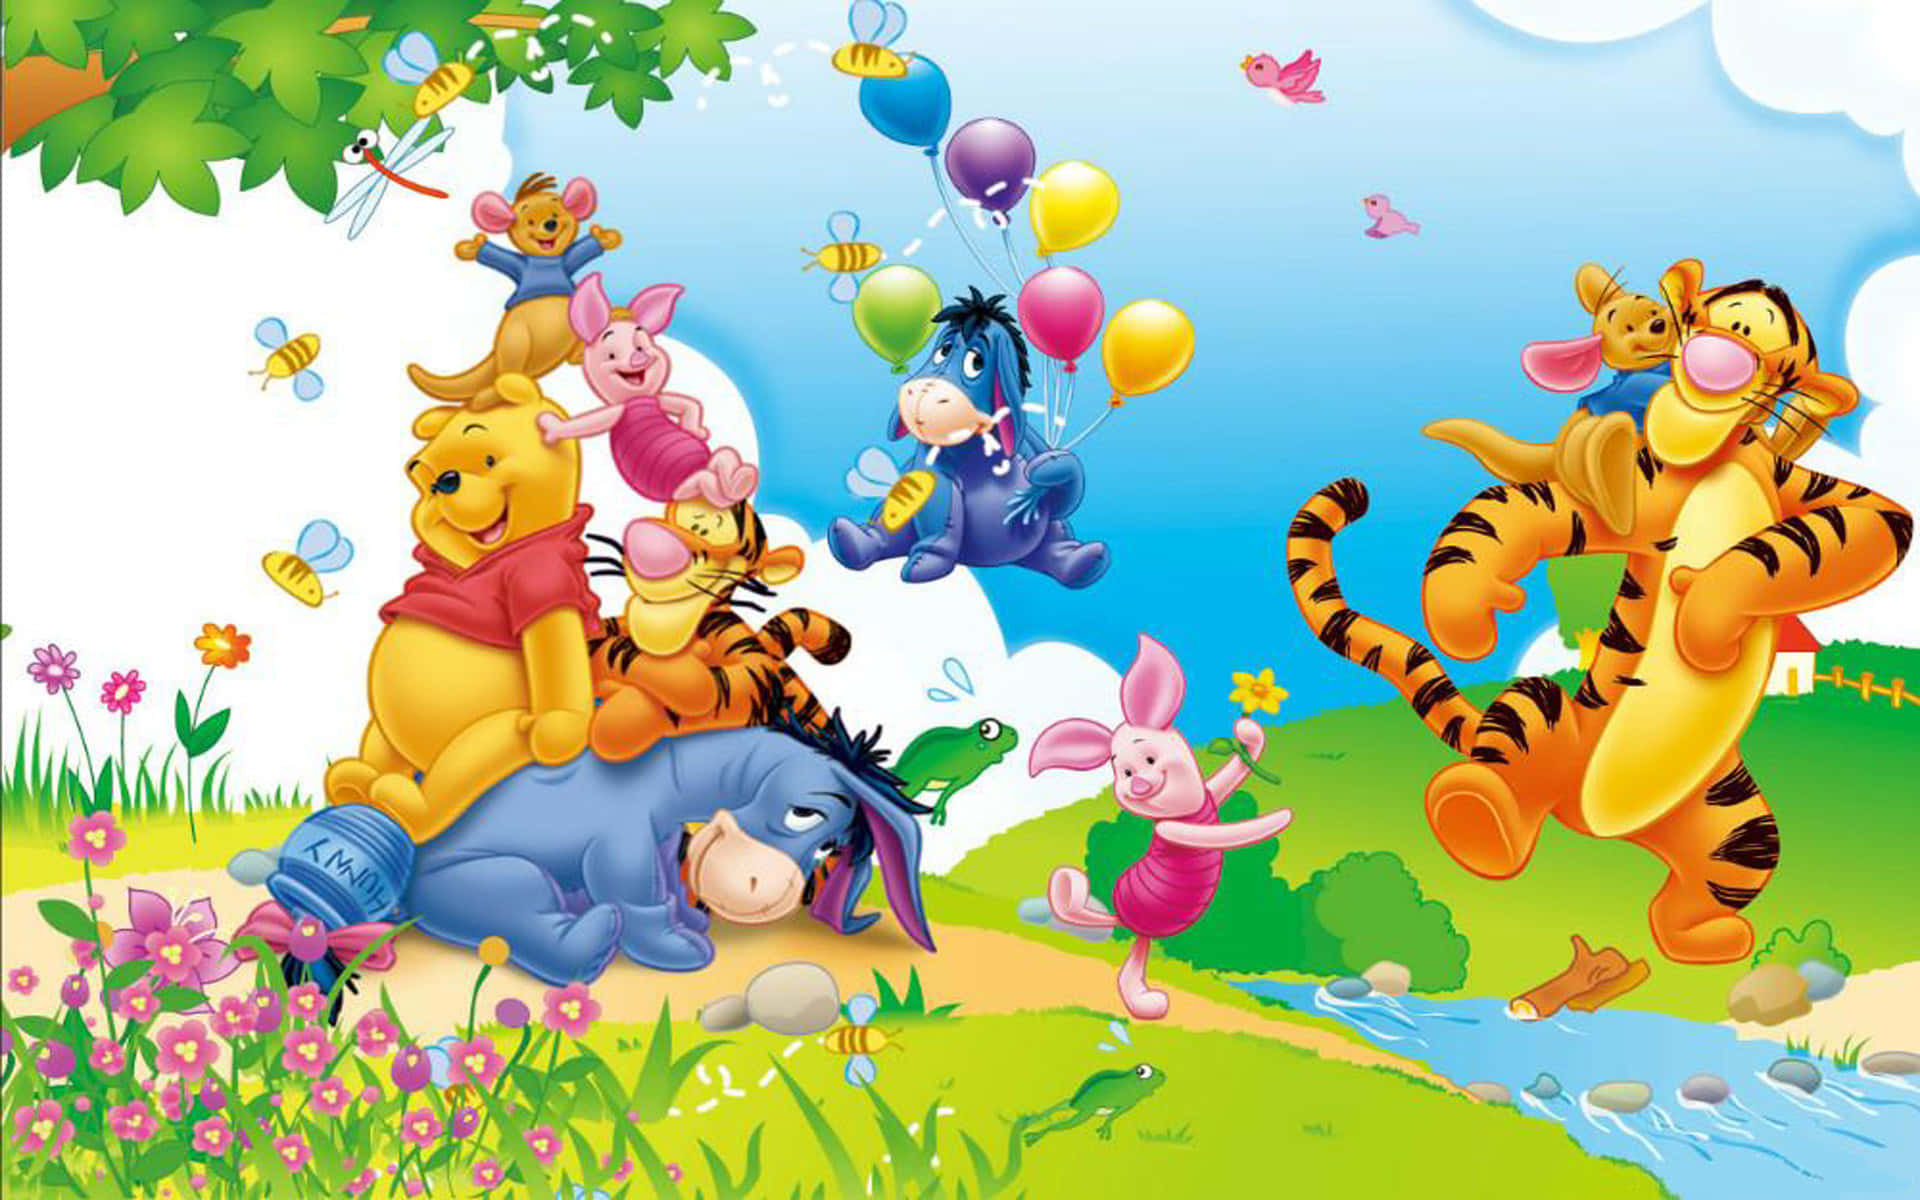 Enjoy the Sweet Delights of Nature with Winnie The Pooh 🍯 Wallpaper